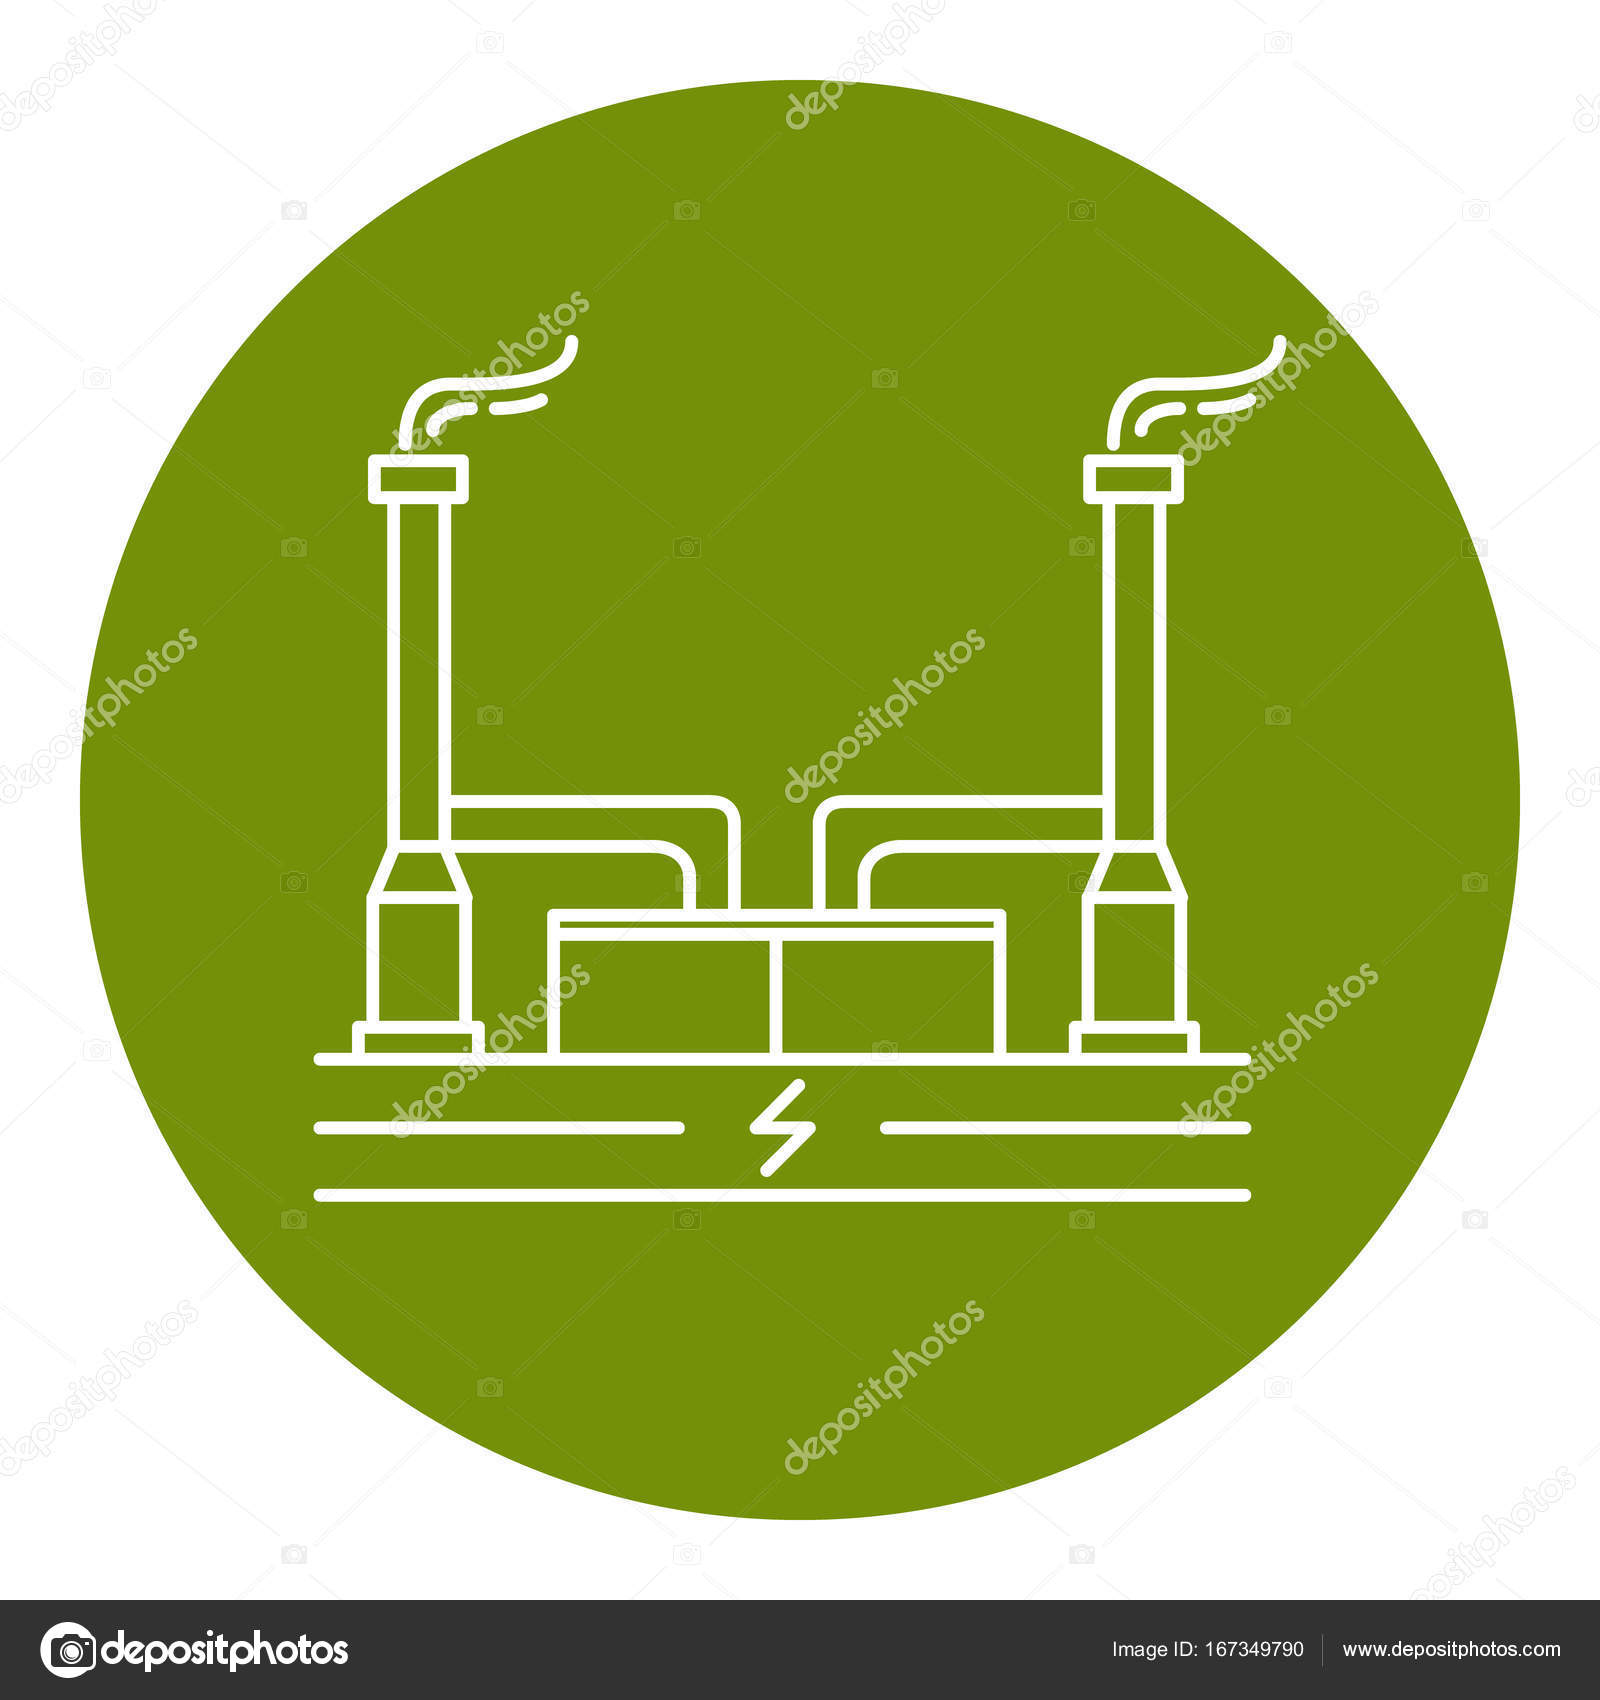 Geothermal energy - Free ecology and environment icons